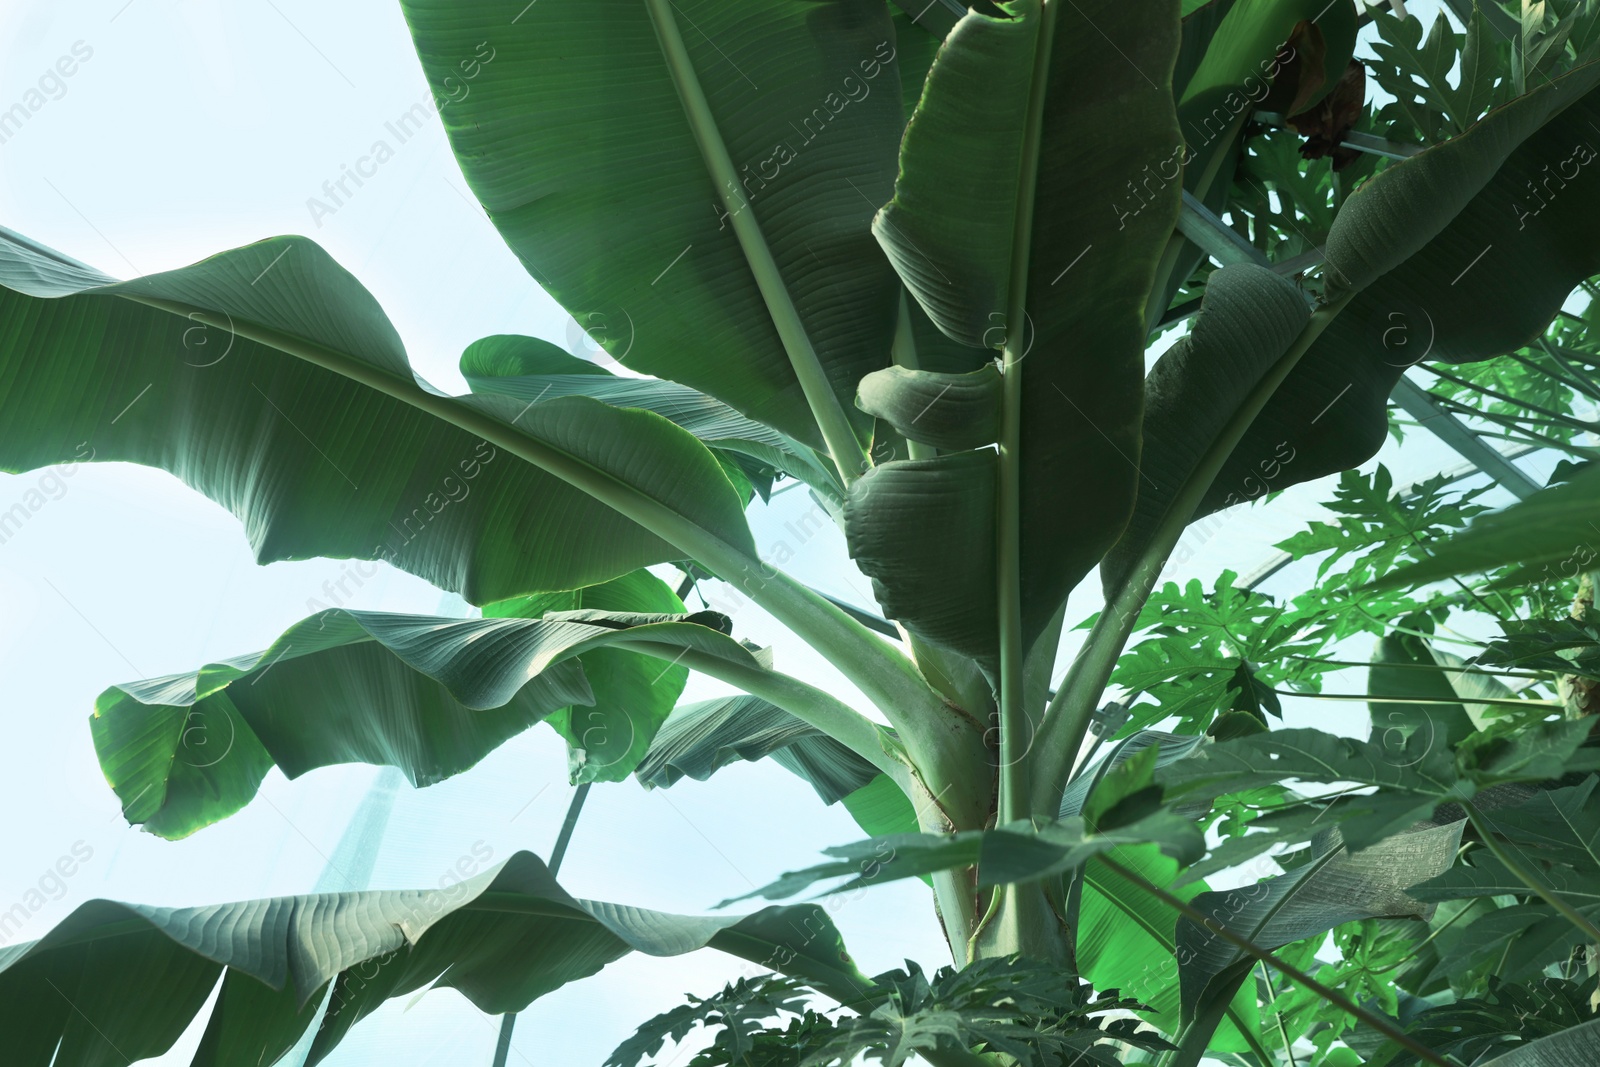 Photo of Banana tree with green leaves growing outdoors, bottom view